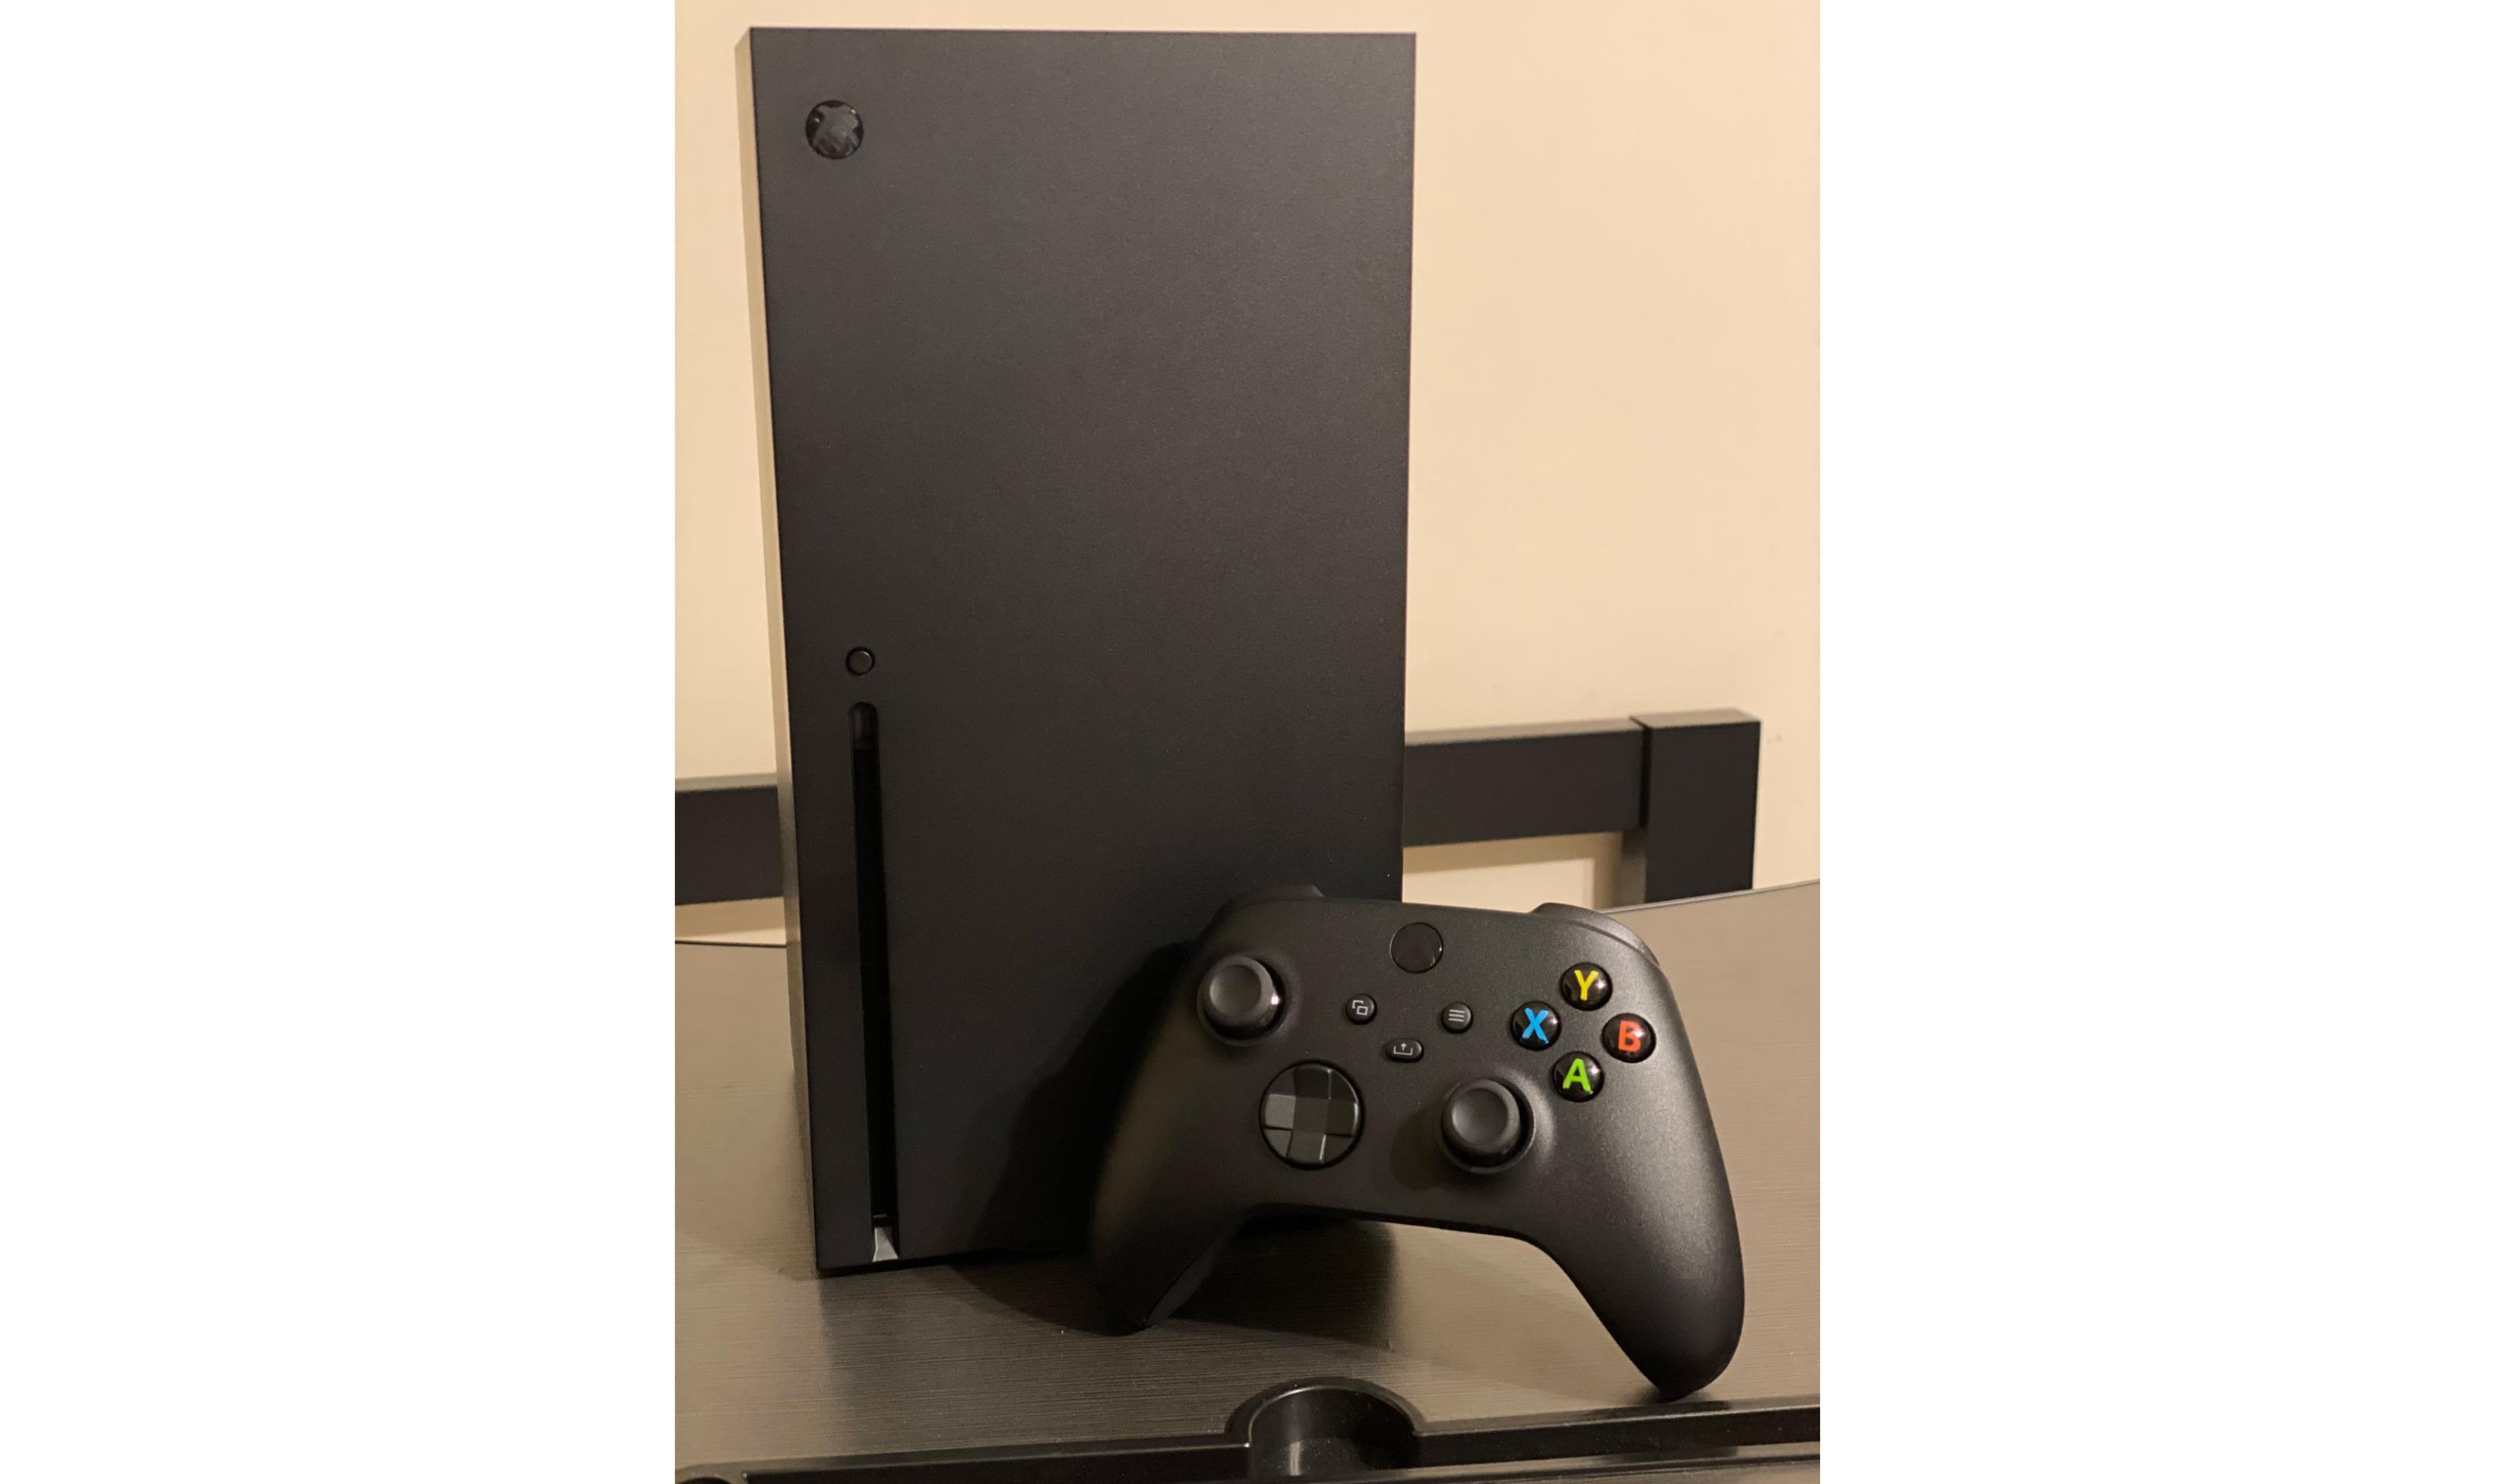 Xbox One X review: A console that keeps up with gaming PCs